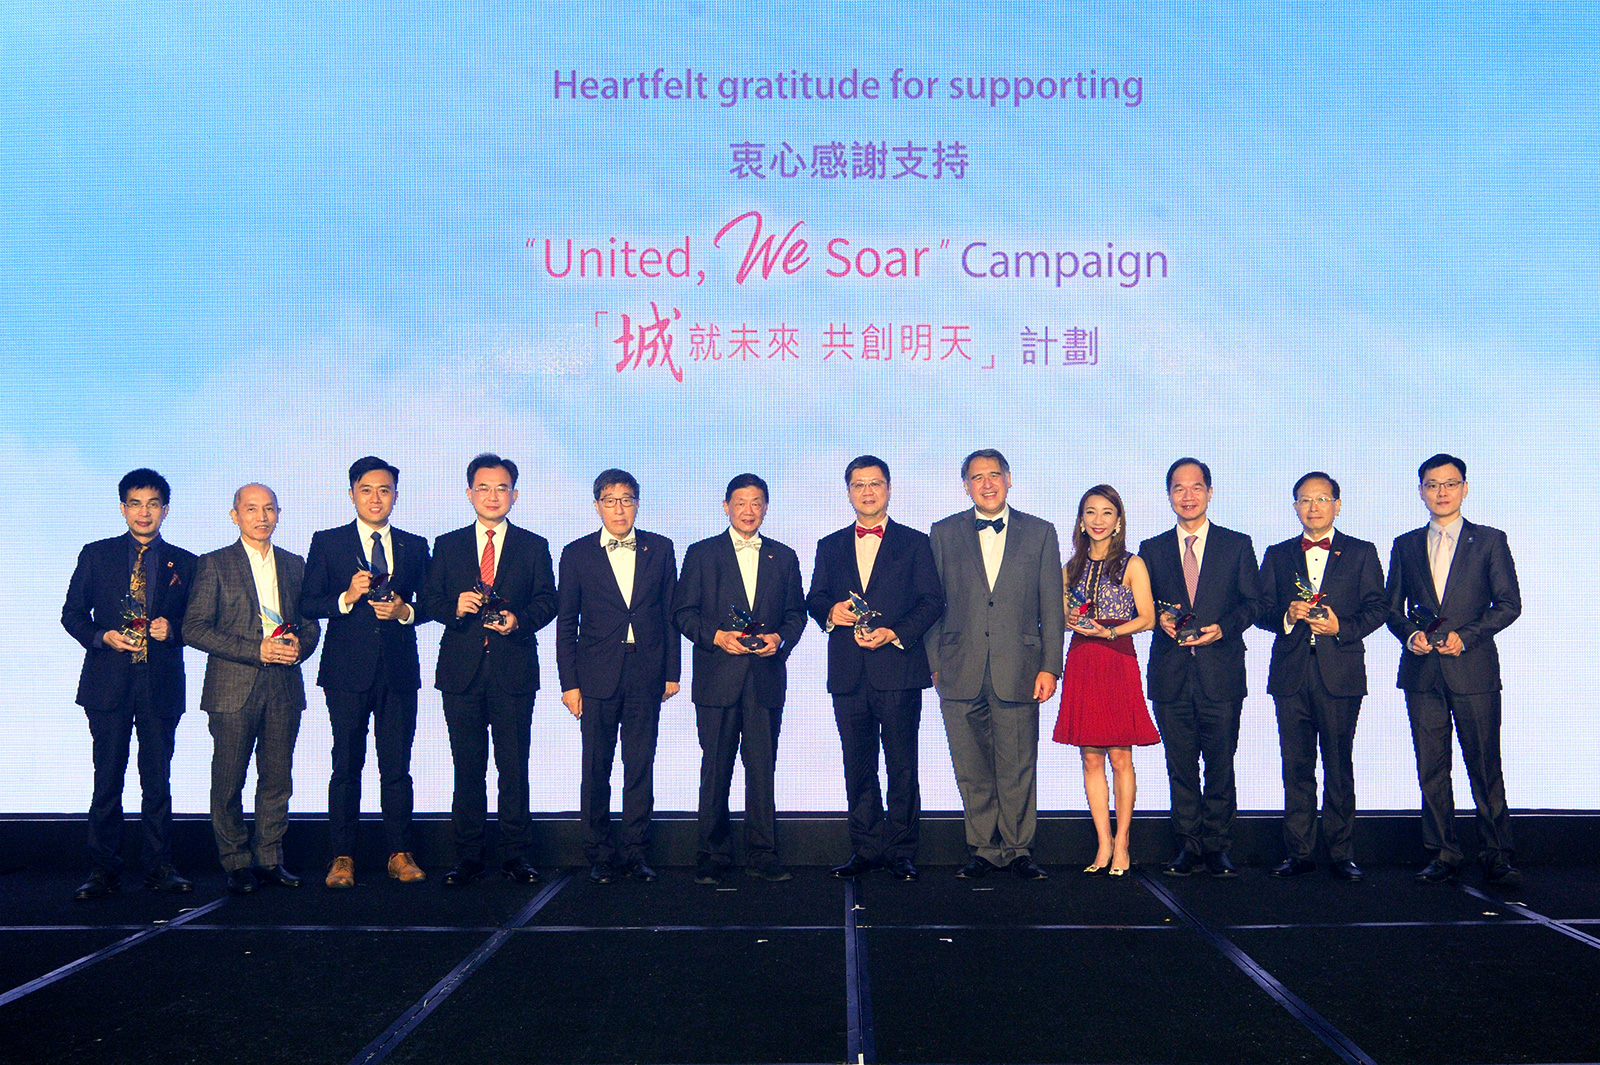 Mr Huang (5th from left) and President Kuo (5th from right) present souvenirs to major donors of “United, We Soar” campaign.